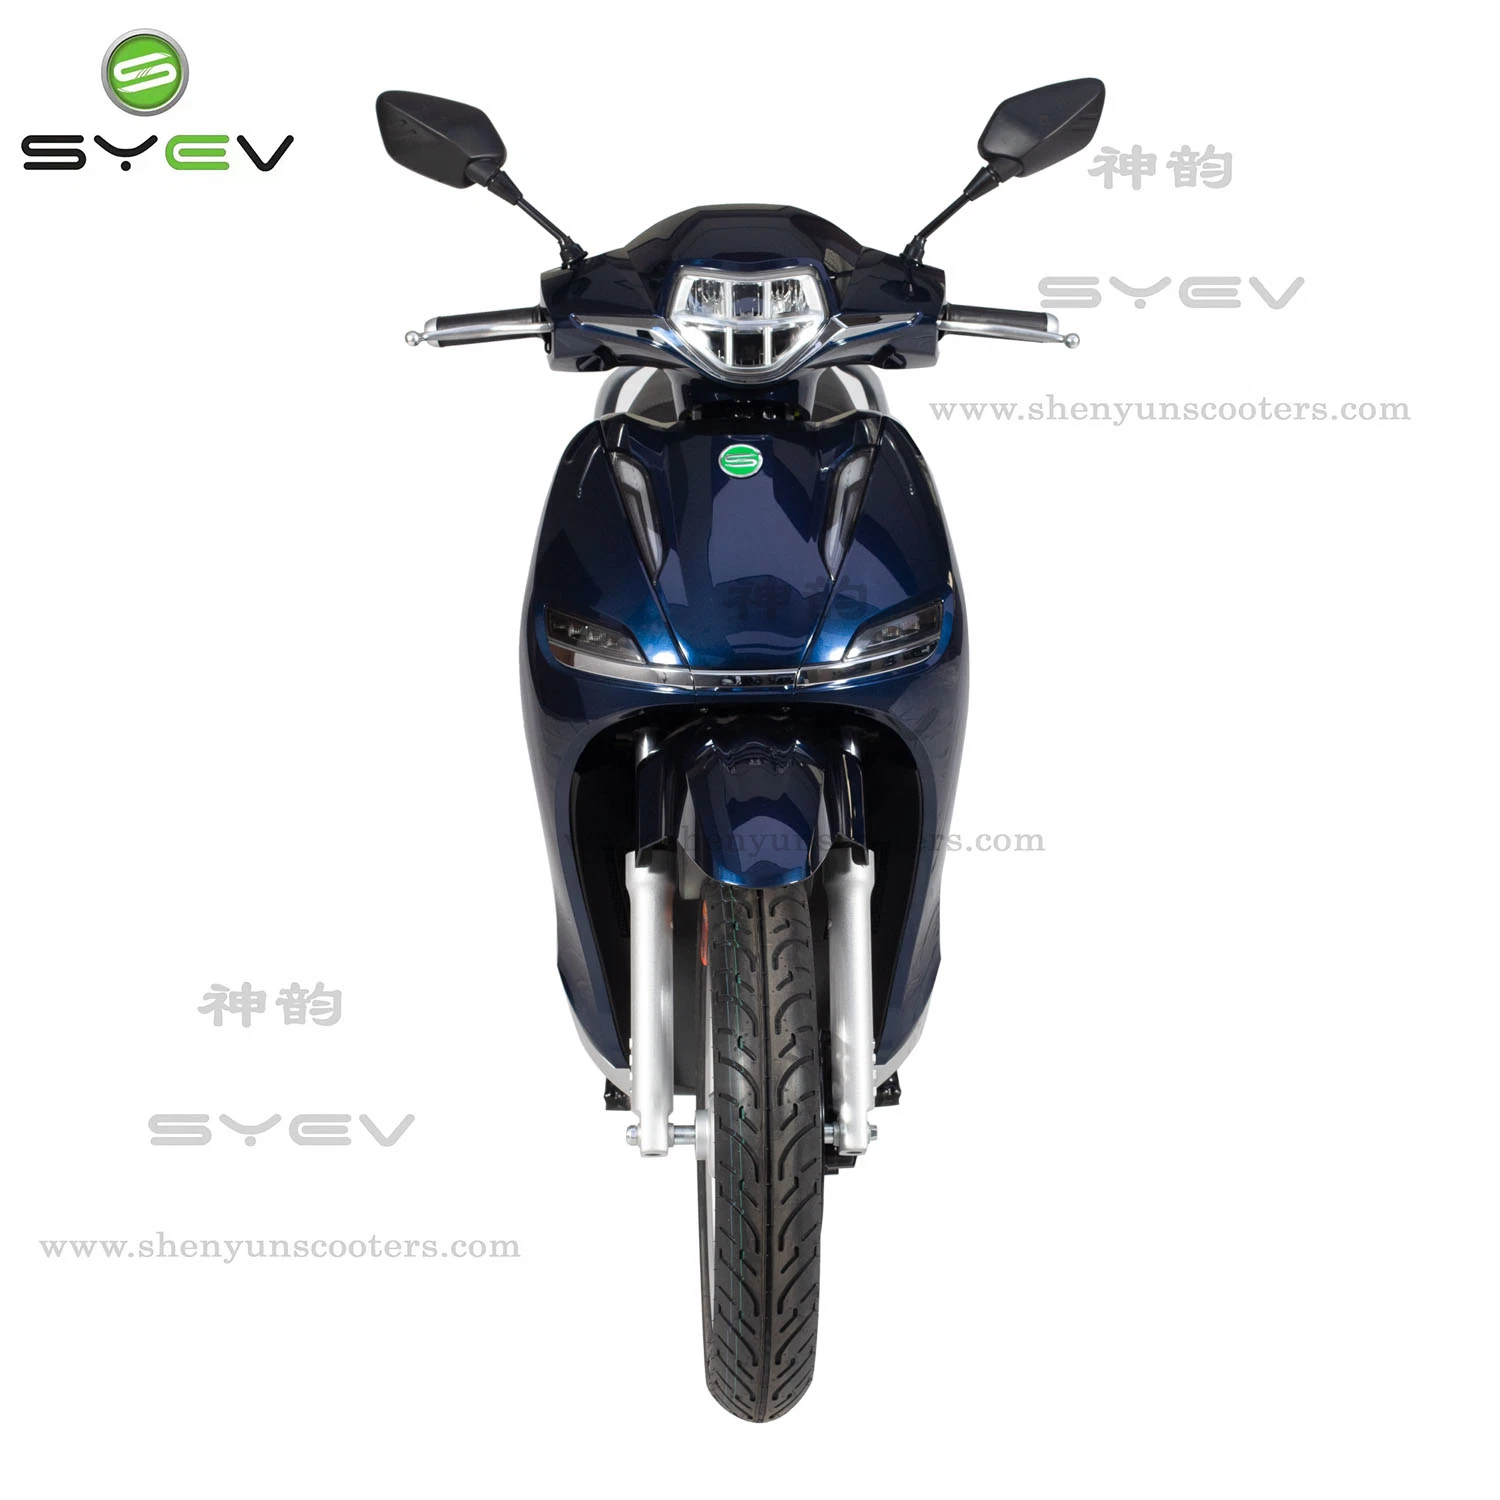 High Speed Powerful 72V Adult EEC Racing Sport Electrical Motor Scooter Electric Motorcycle